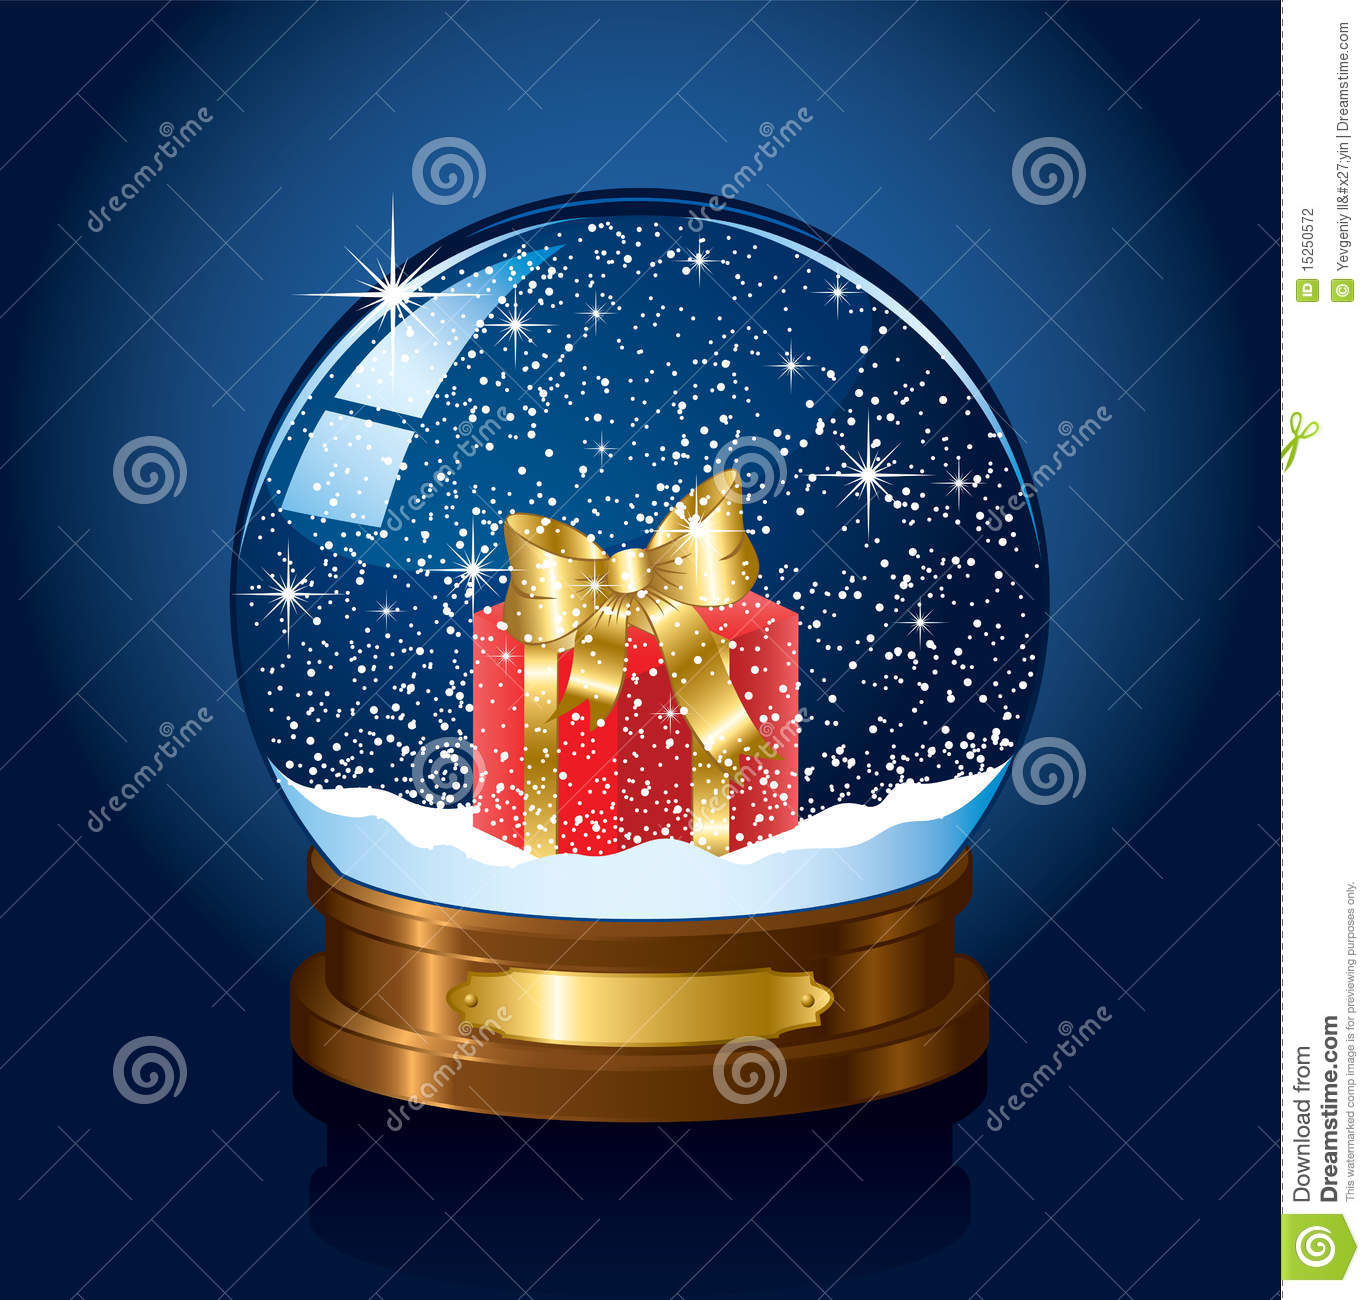 Christmas Snow Globe With The Falling Snow Illustration